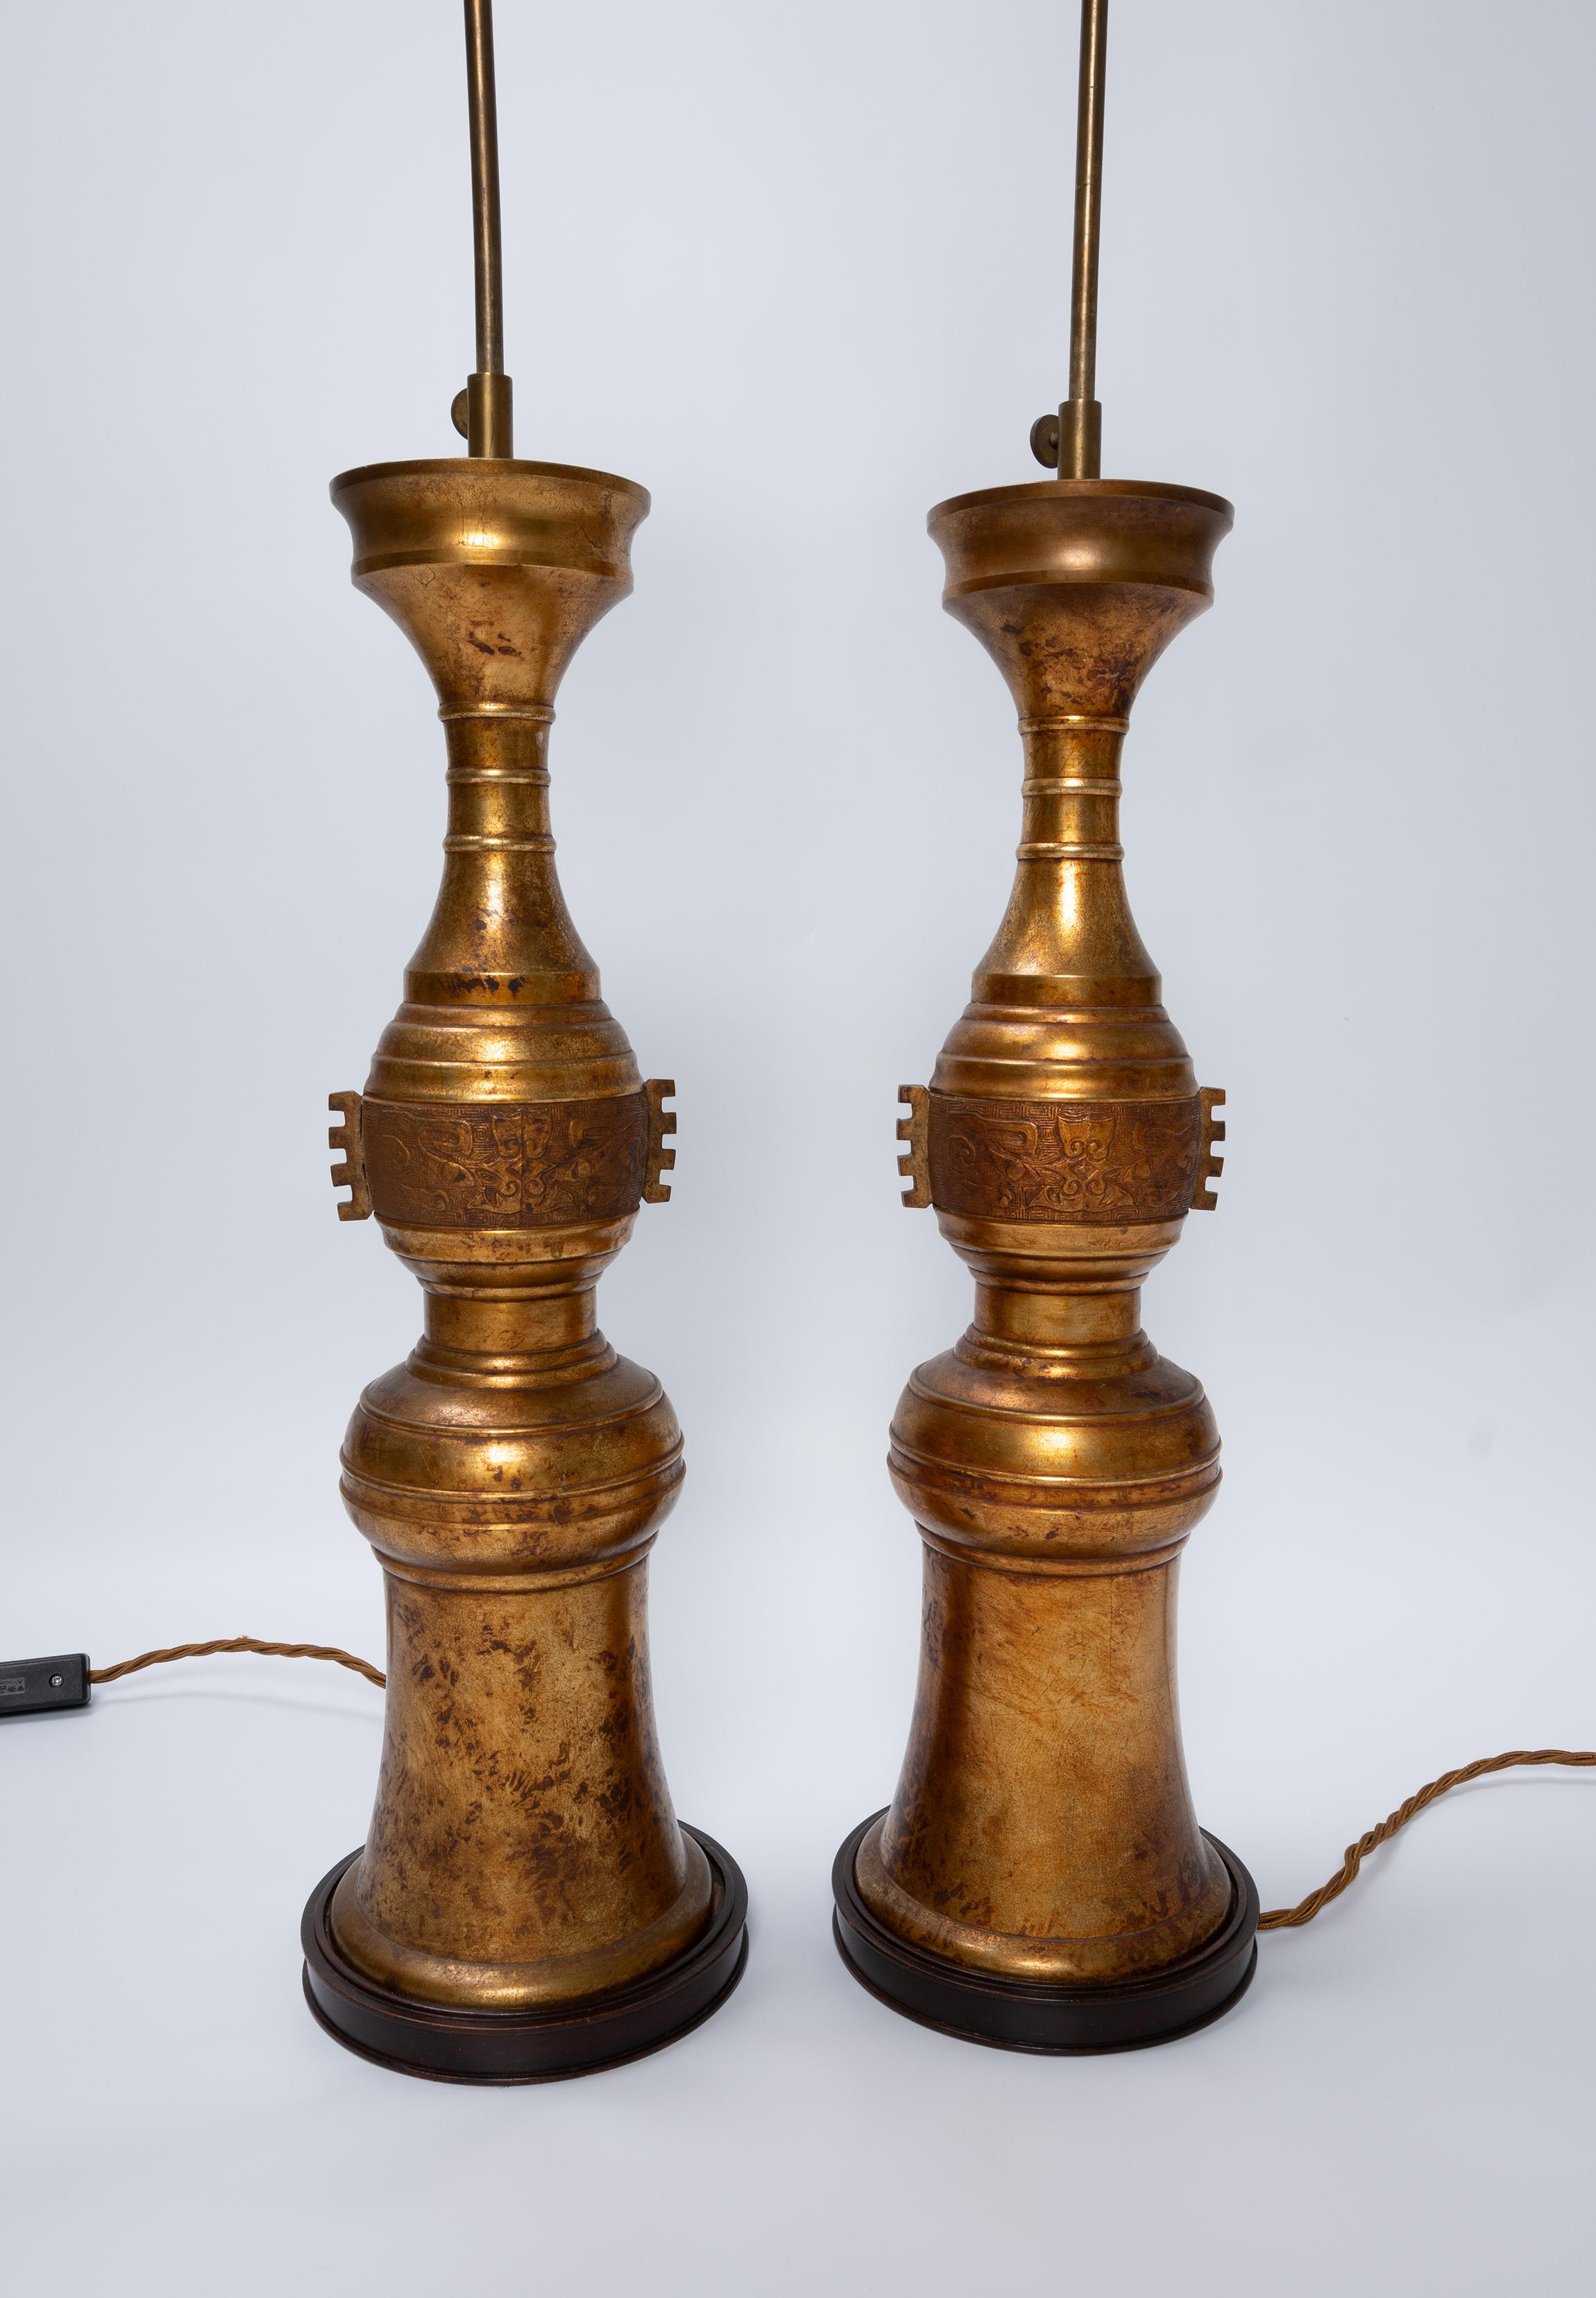 Pair Tall Chinoiserie Gilt Bronze Altar Lamps C.1950
In very good condition commensurate of age.